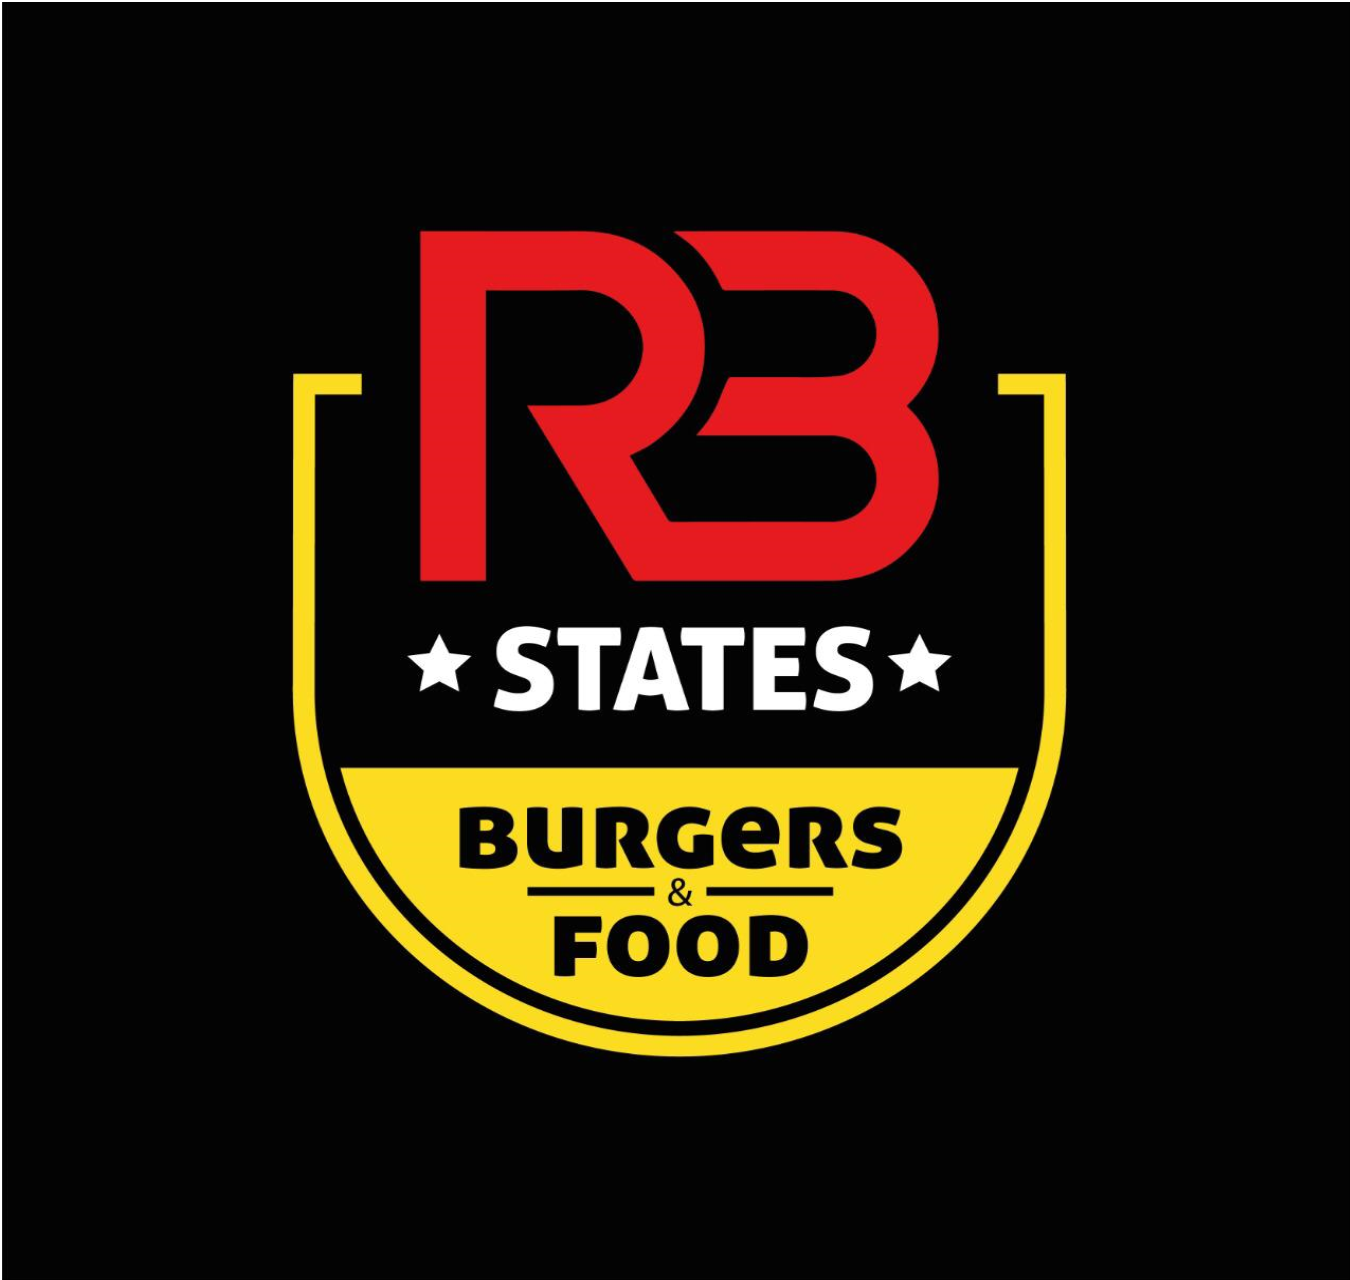 Logo-Fast Food - RB States Burguers and Food